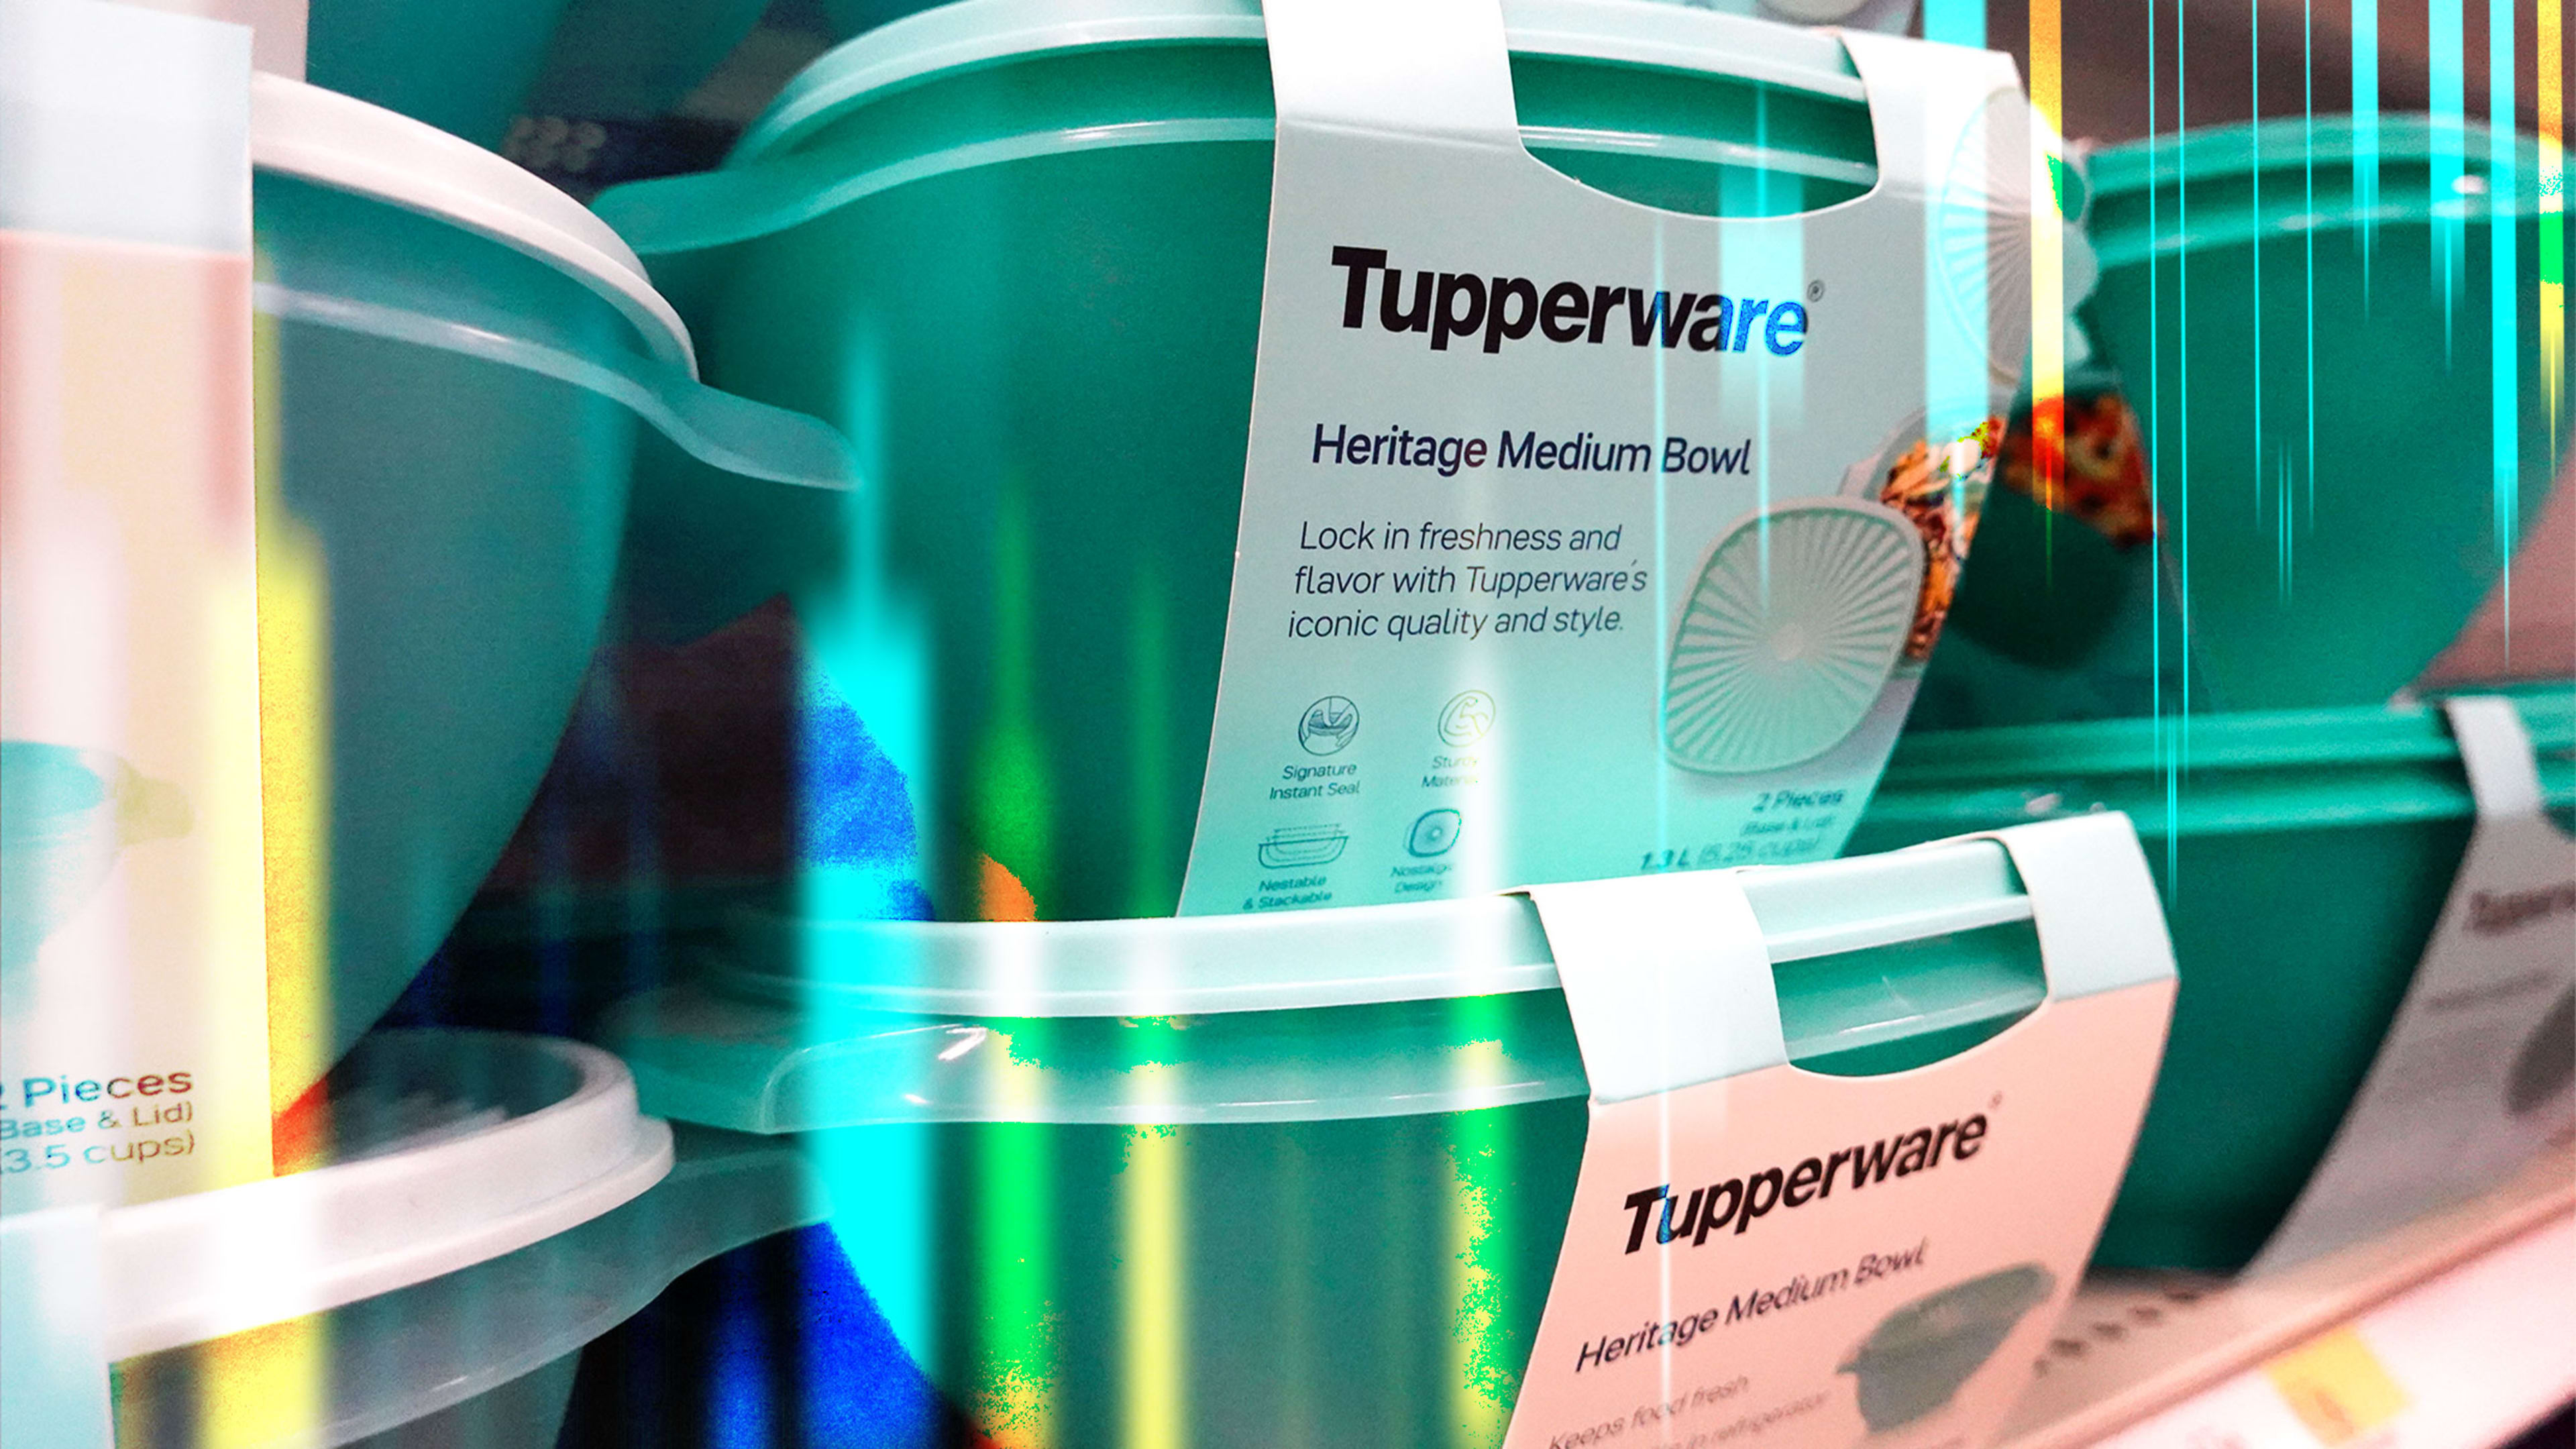 Tupperware stock is the latest Wall Street meme. TUP price surges 350% in 5 days